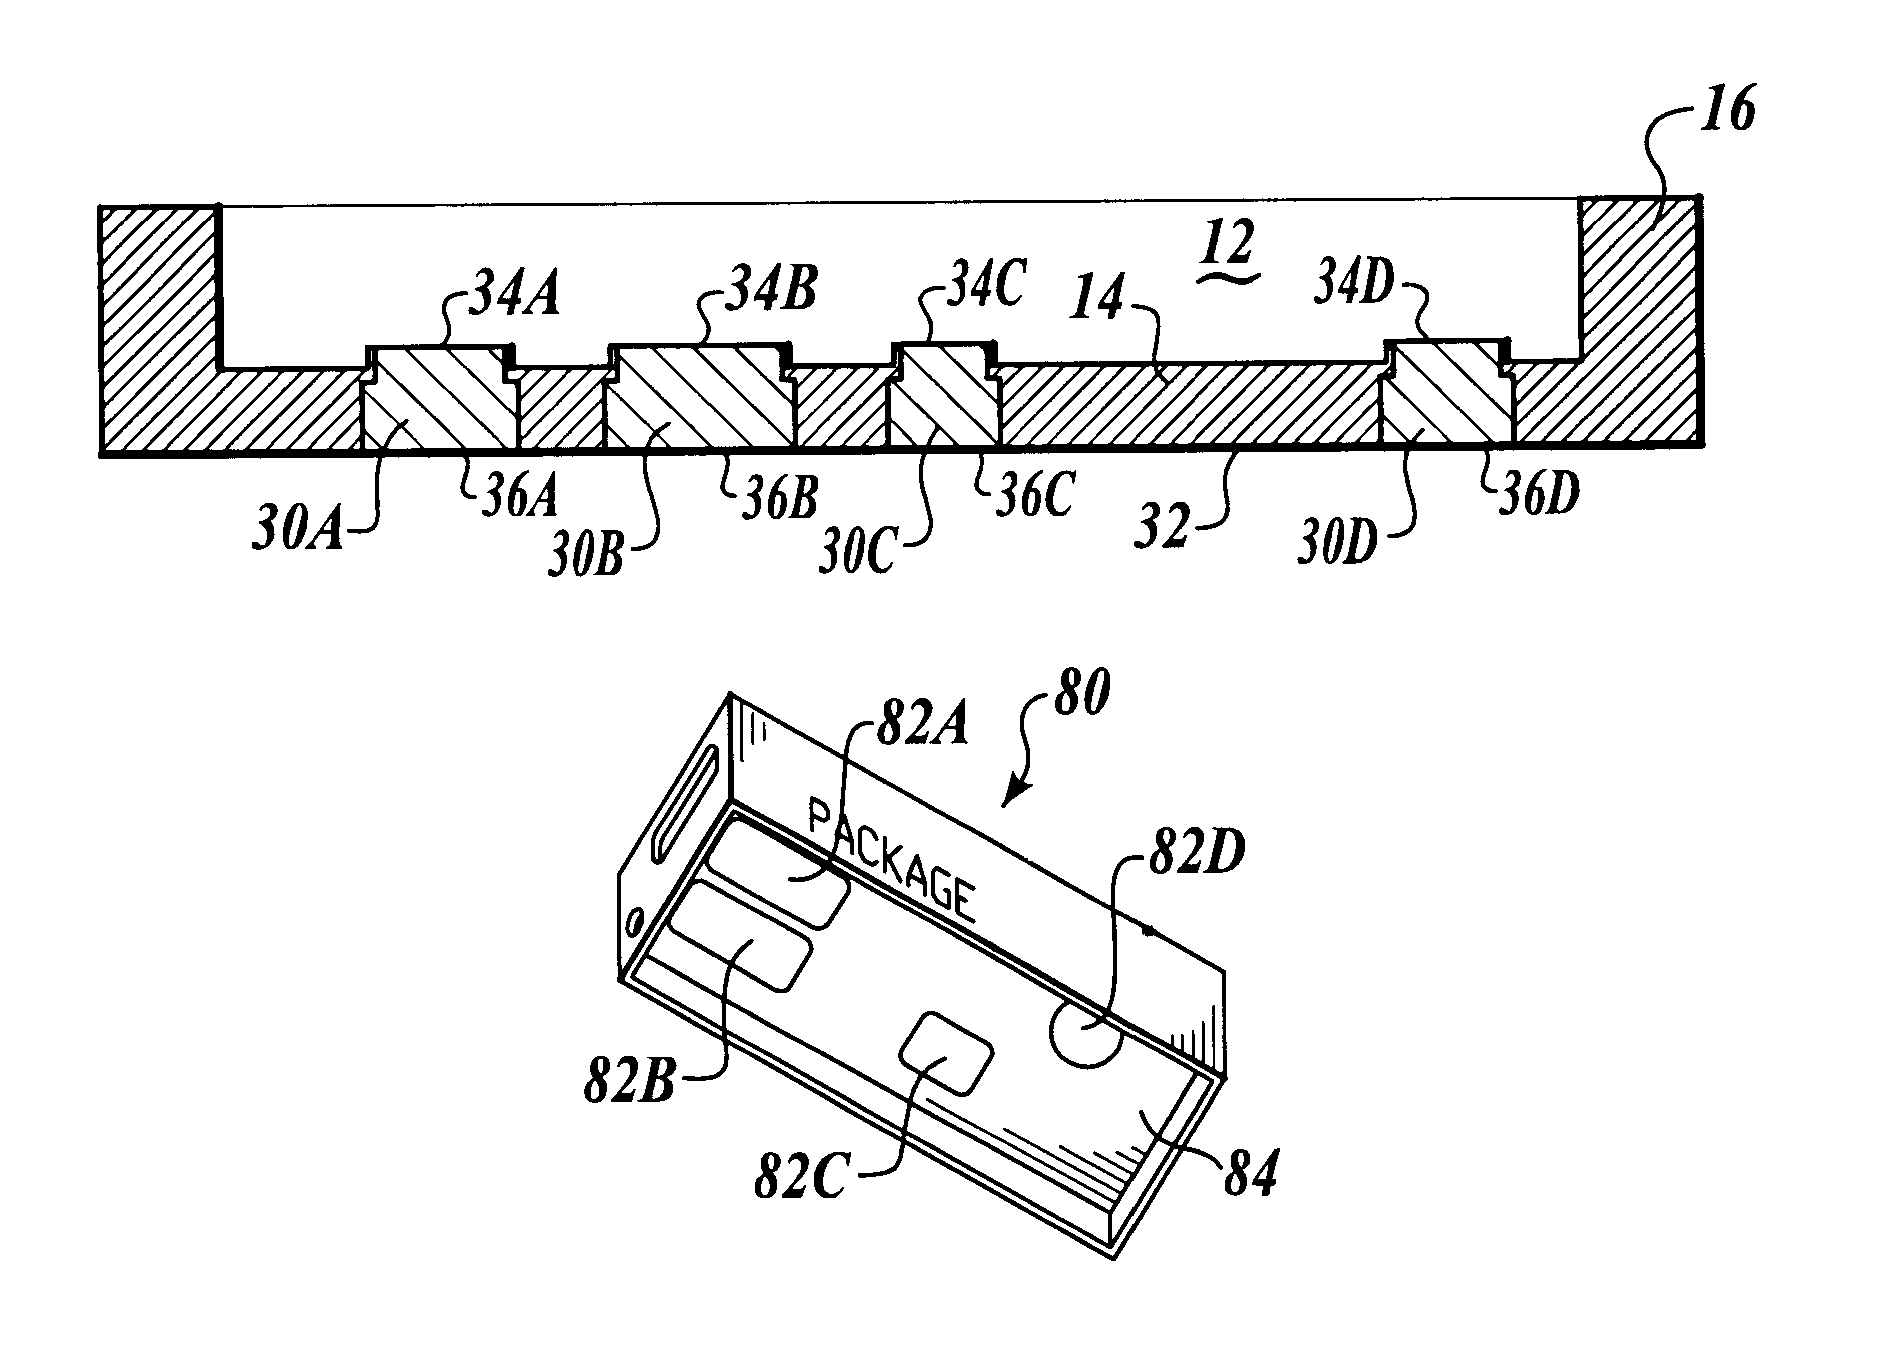 Electronics packages having a composite structure and methods for manufacturing such electronics packages